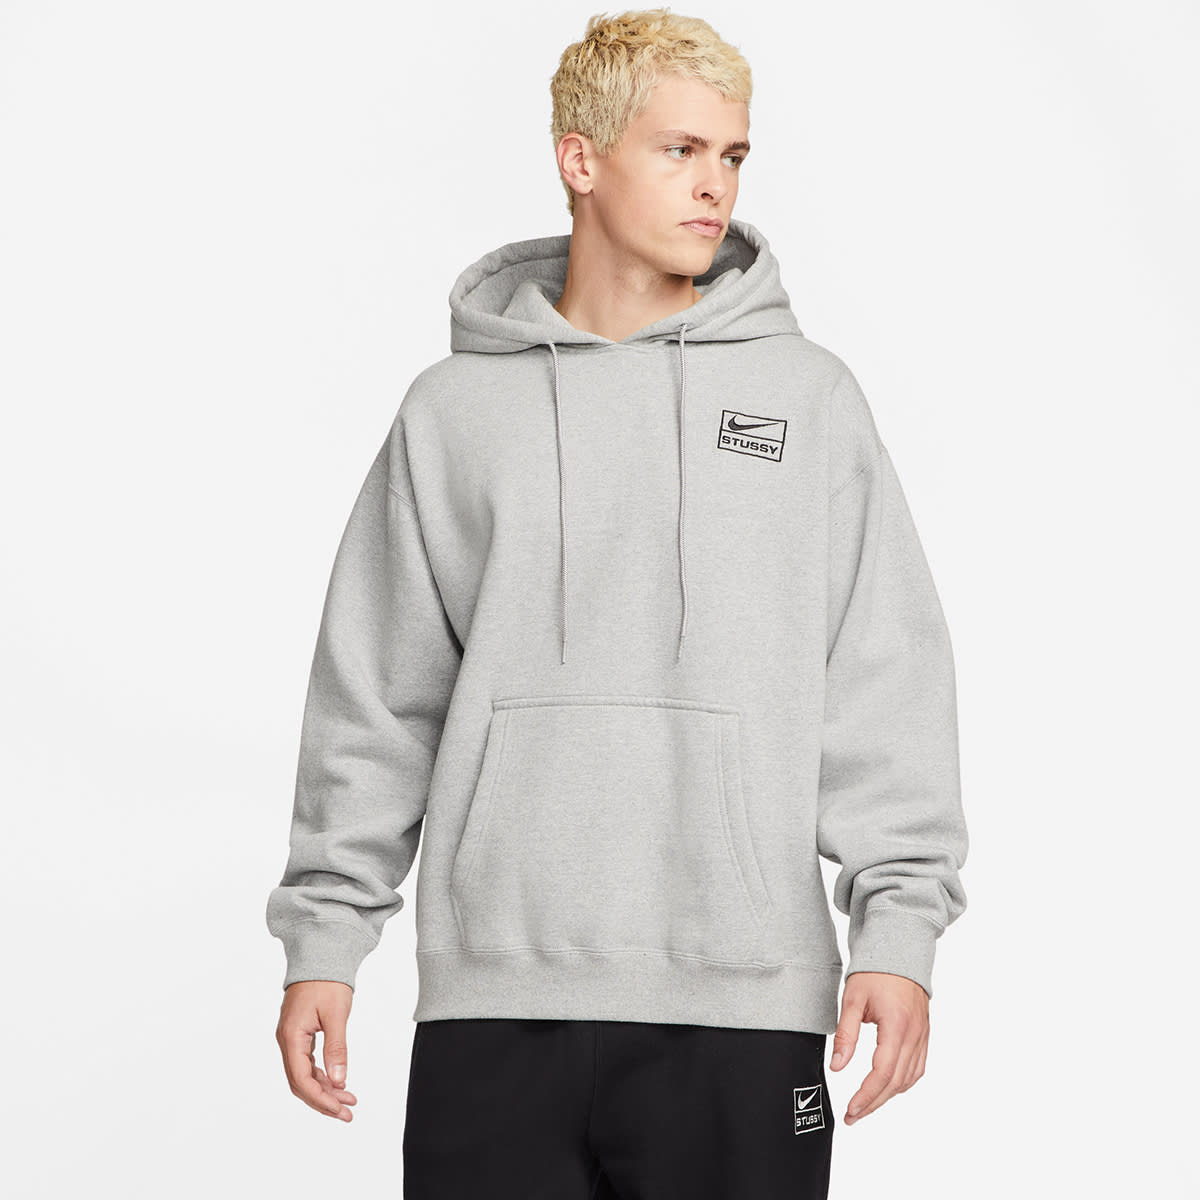 Nike x Stussy Popover Hoody (Dark Grey Heather) | END. Launches